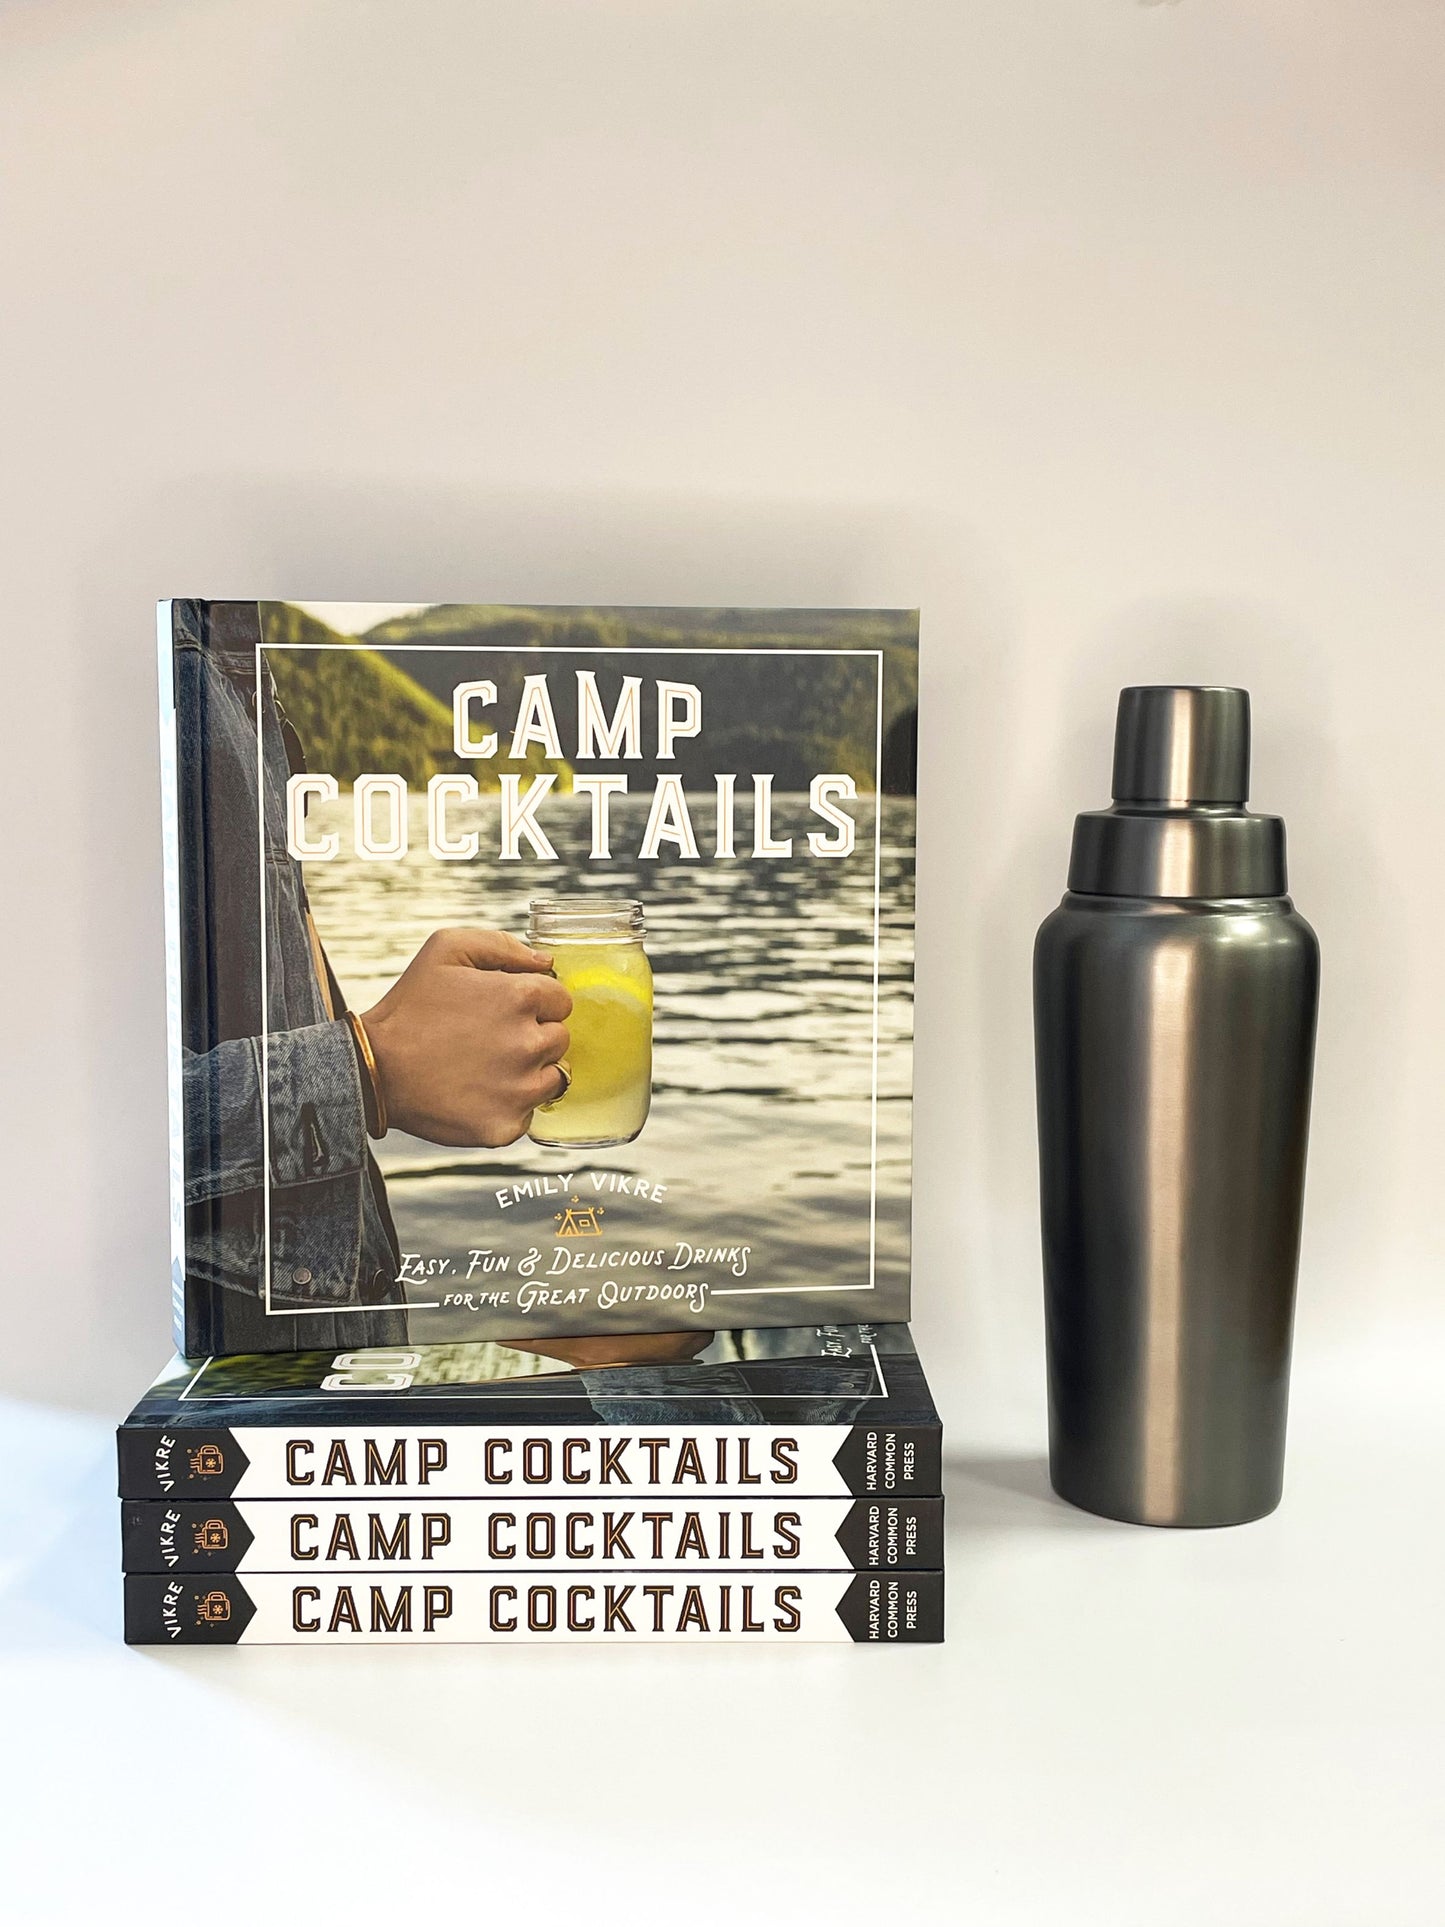 Camp Cocktails book with Gunmental cocktail shaker